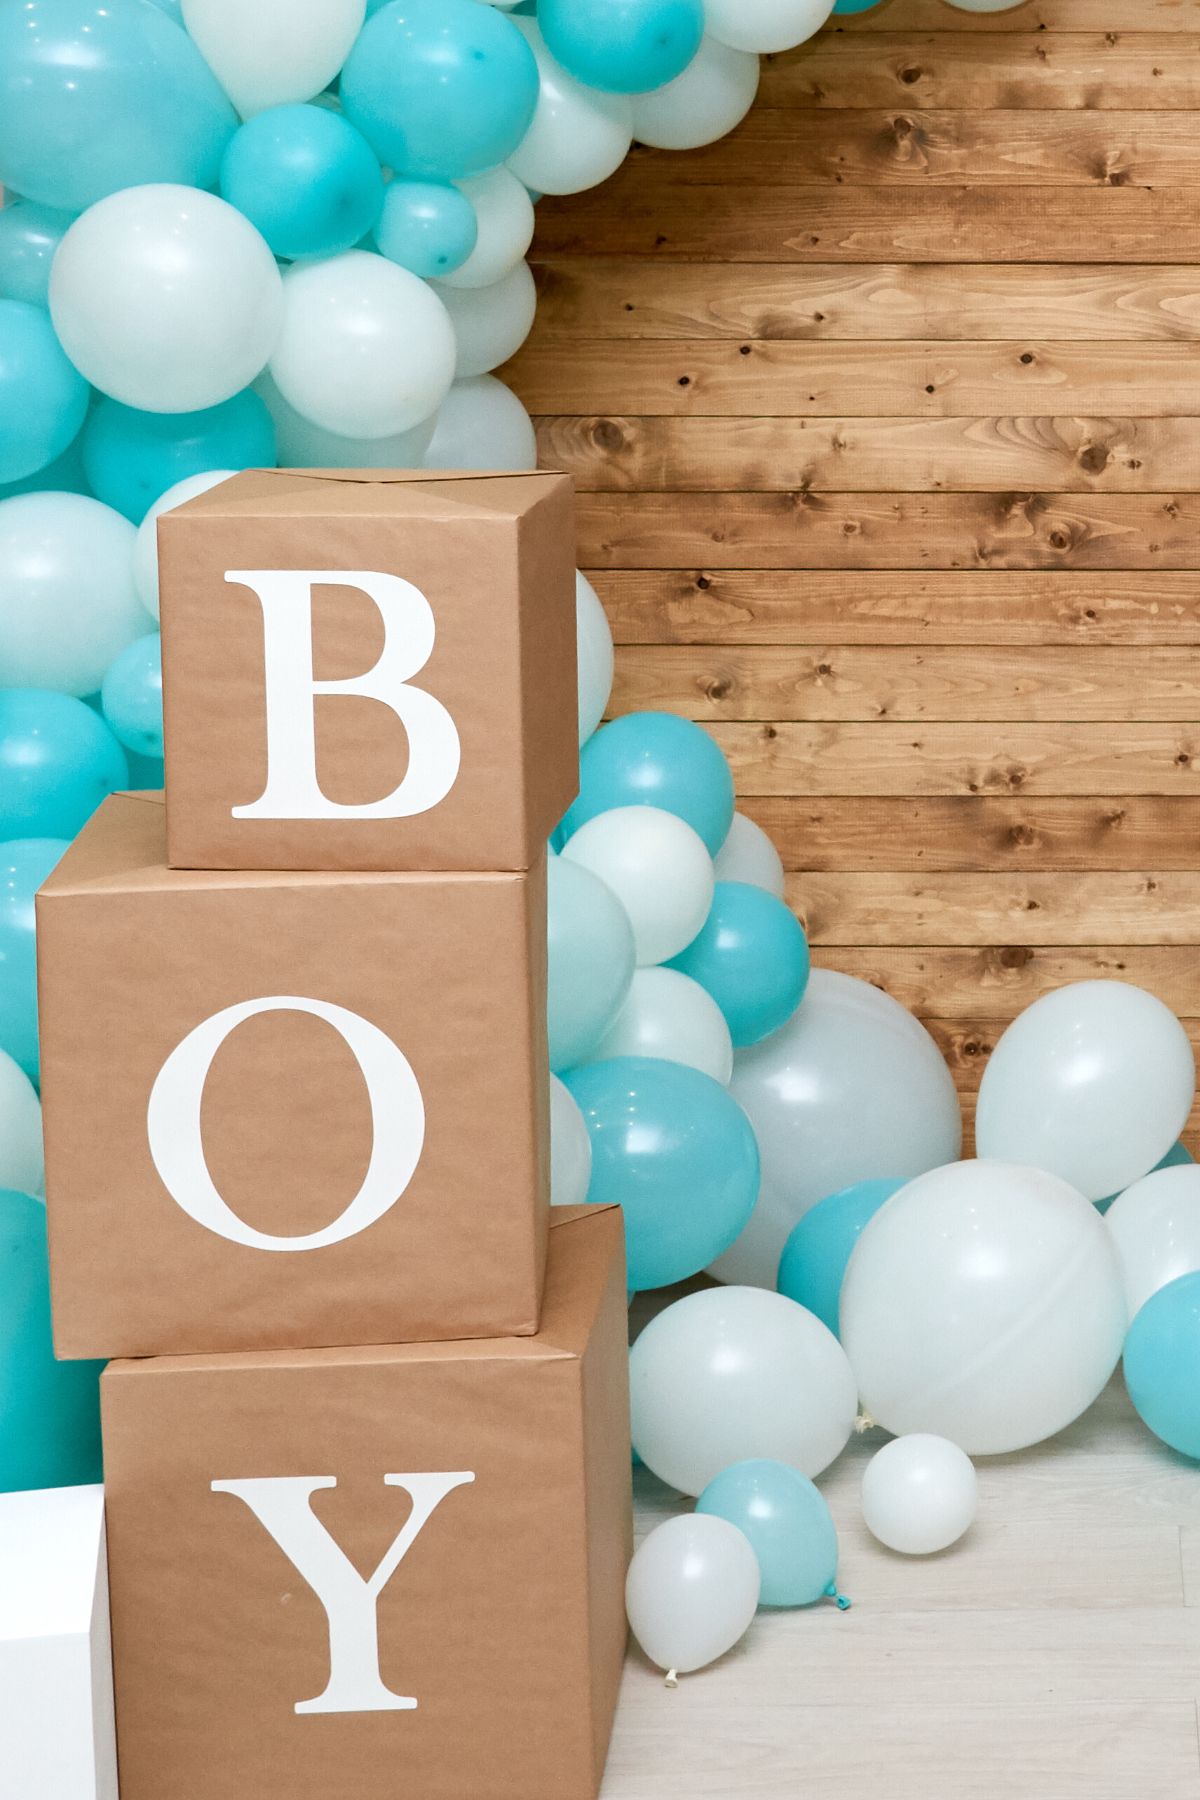 Boy spelled on three stacked boxes in front of a blue balloon arch.